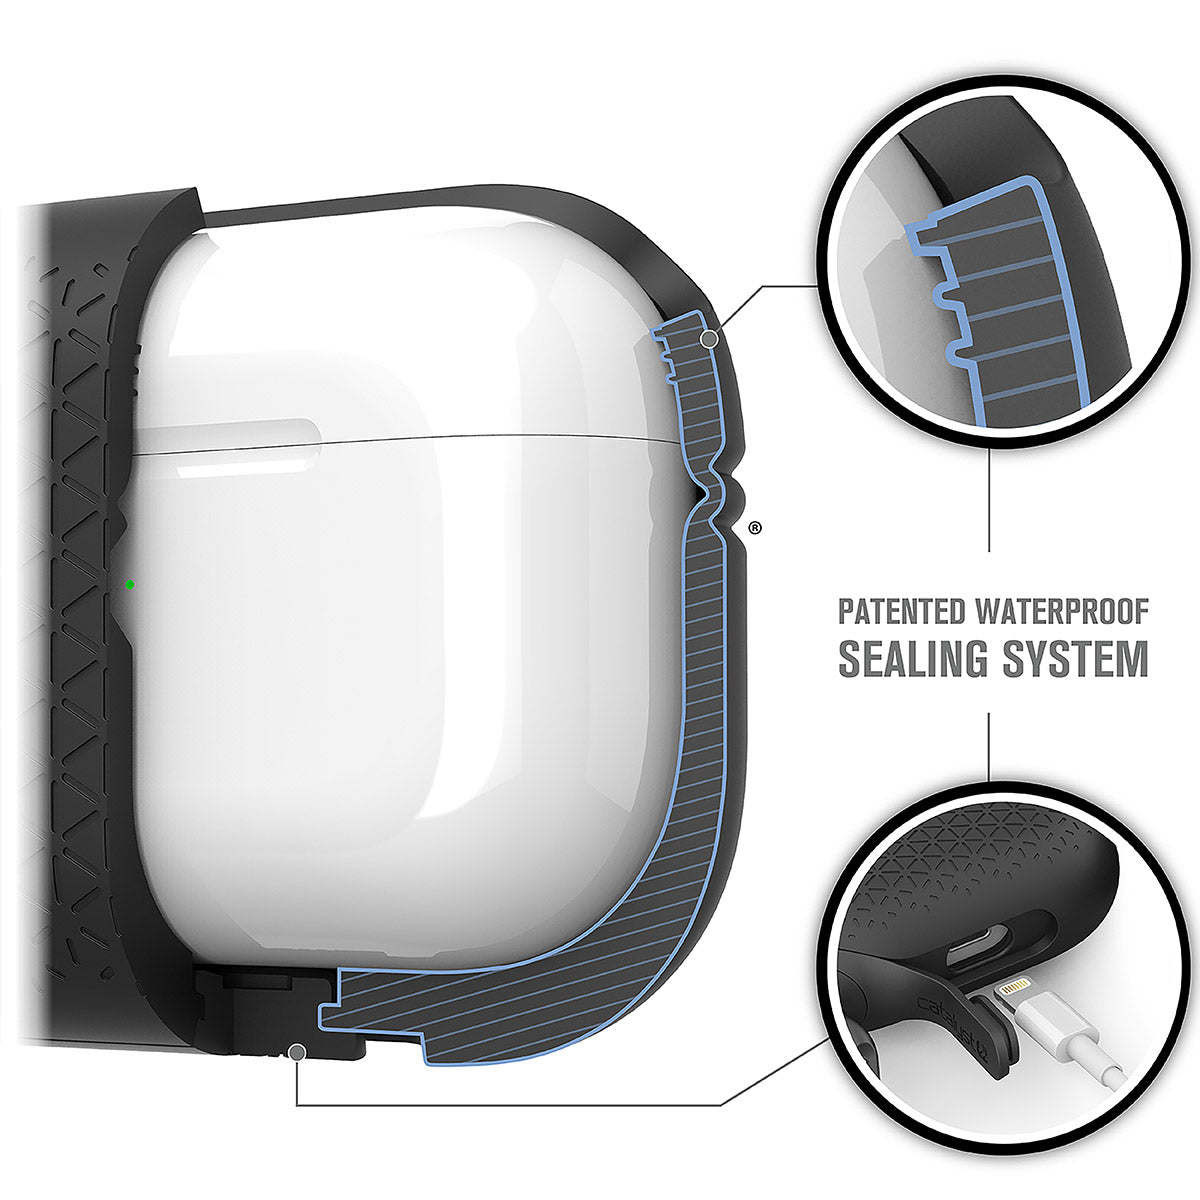 catalyst airpods pro gen 2 1 waterproof case carabiner premium edition stealth black showing the patented waterproof sealing system texts reads patented waterproof sealing system